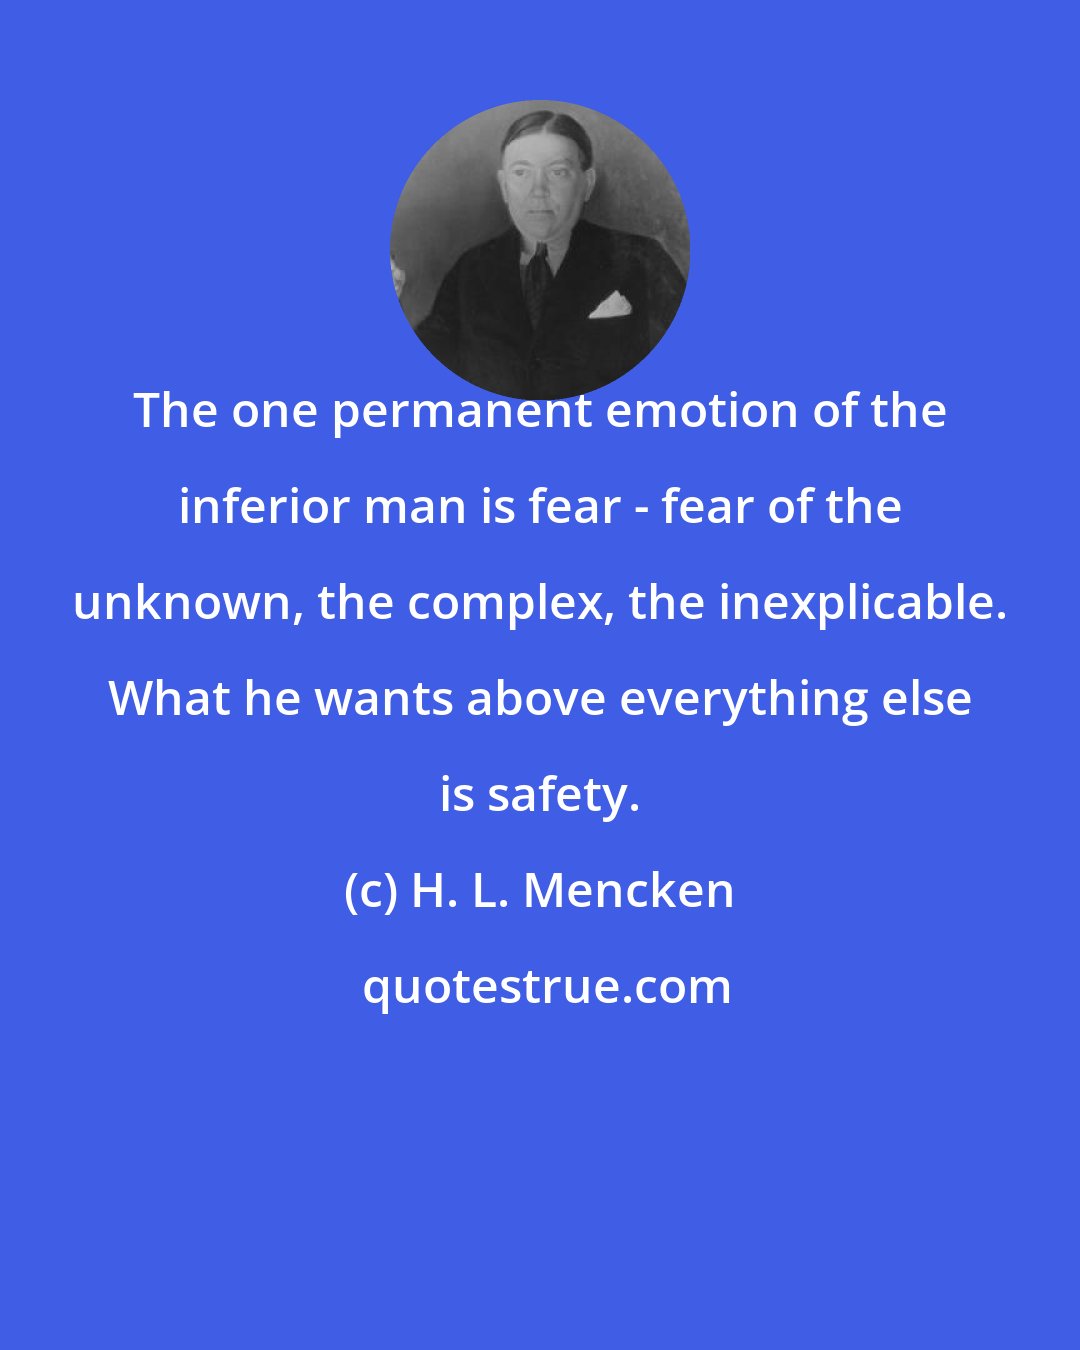 H. L. Mencken: The one permanent emotion of the inferior man is fear - fear of the unknown, the complex, the inexplicable. What he wants above everything else is safety.